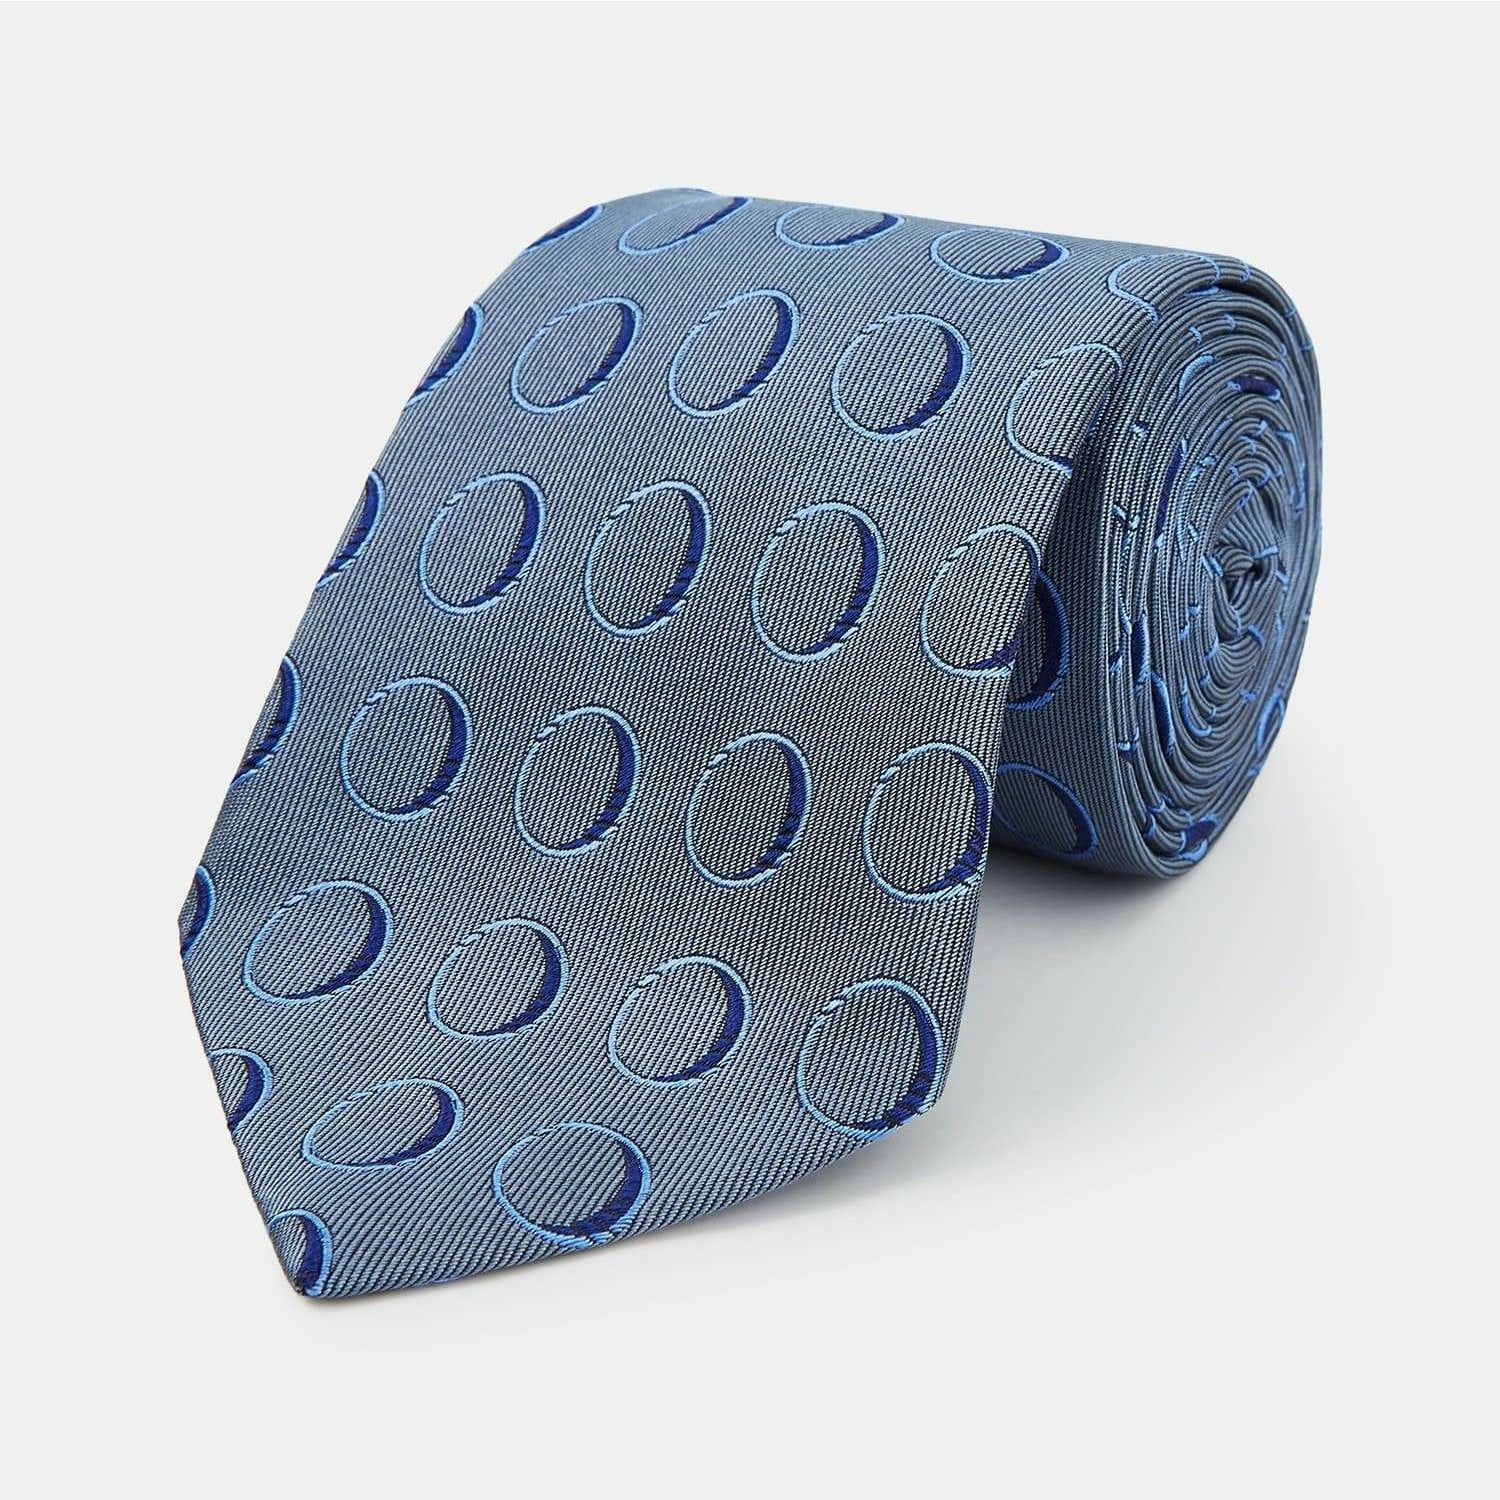 Silk Tie By Turnbull & Asser - Die Another Day Edition - 007STORE